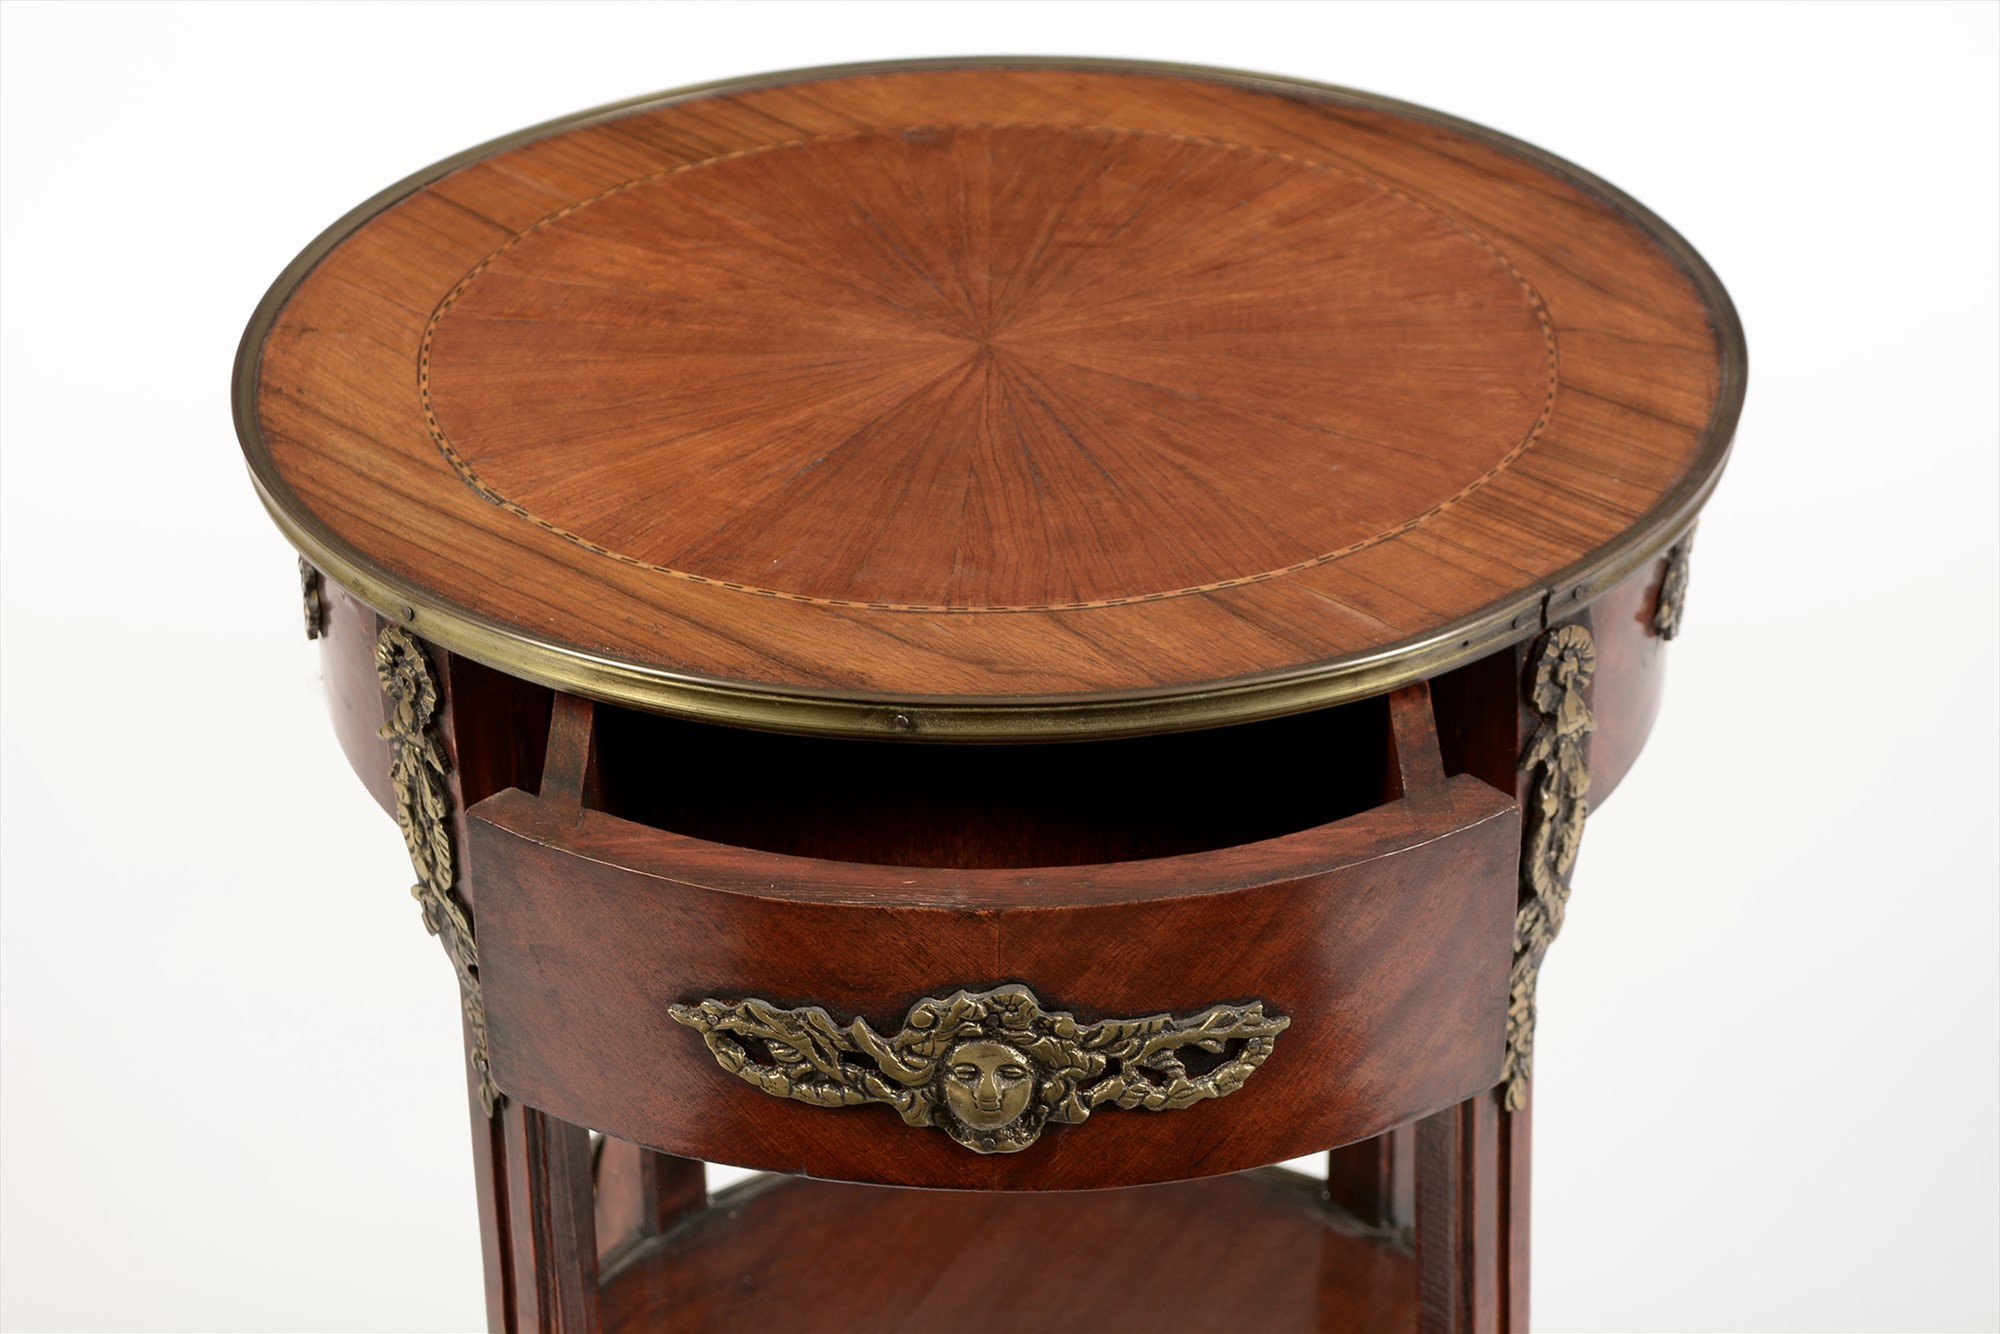 20th century Empire style kingwood and rosewood banded mahogany occasional table - Image 2 of 3